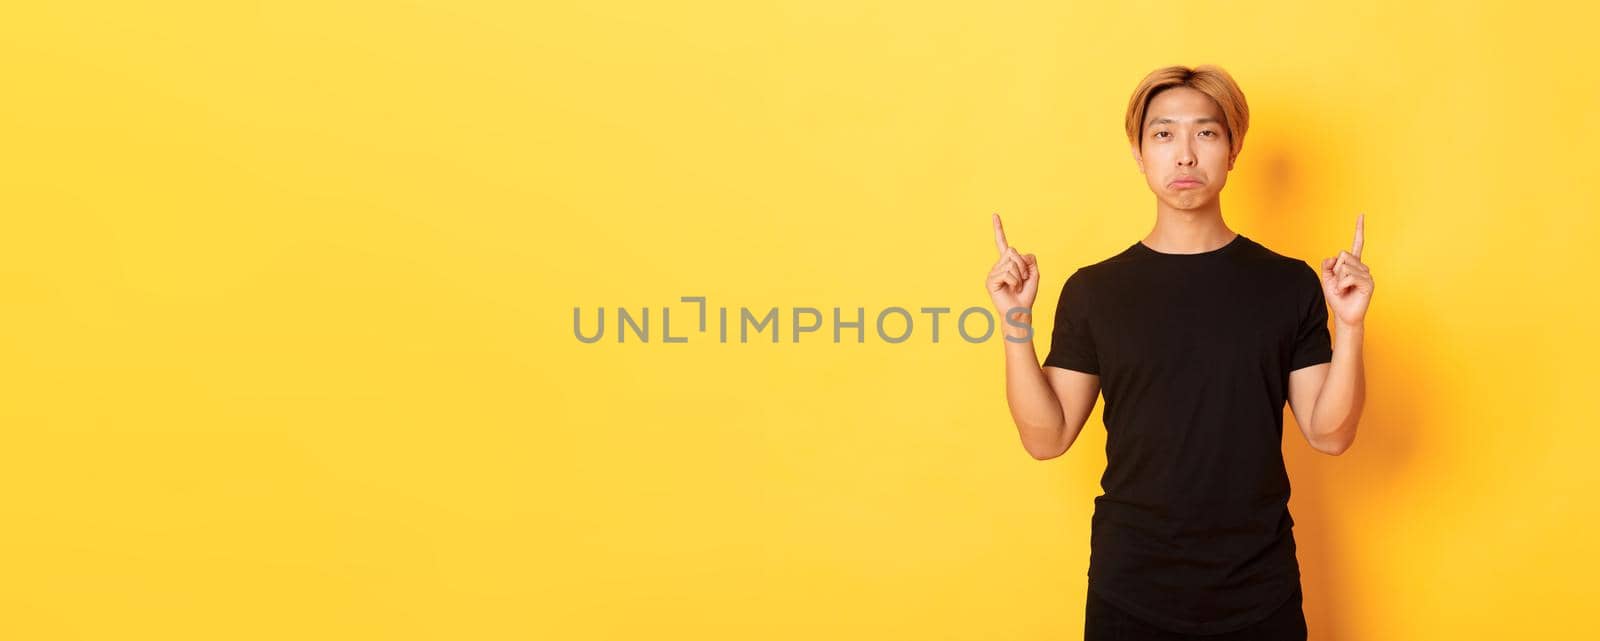 Portrait of sulking gloomy asian guy looking disappointed, pointing fingers up, yellow background.